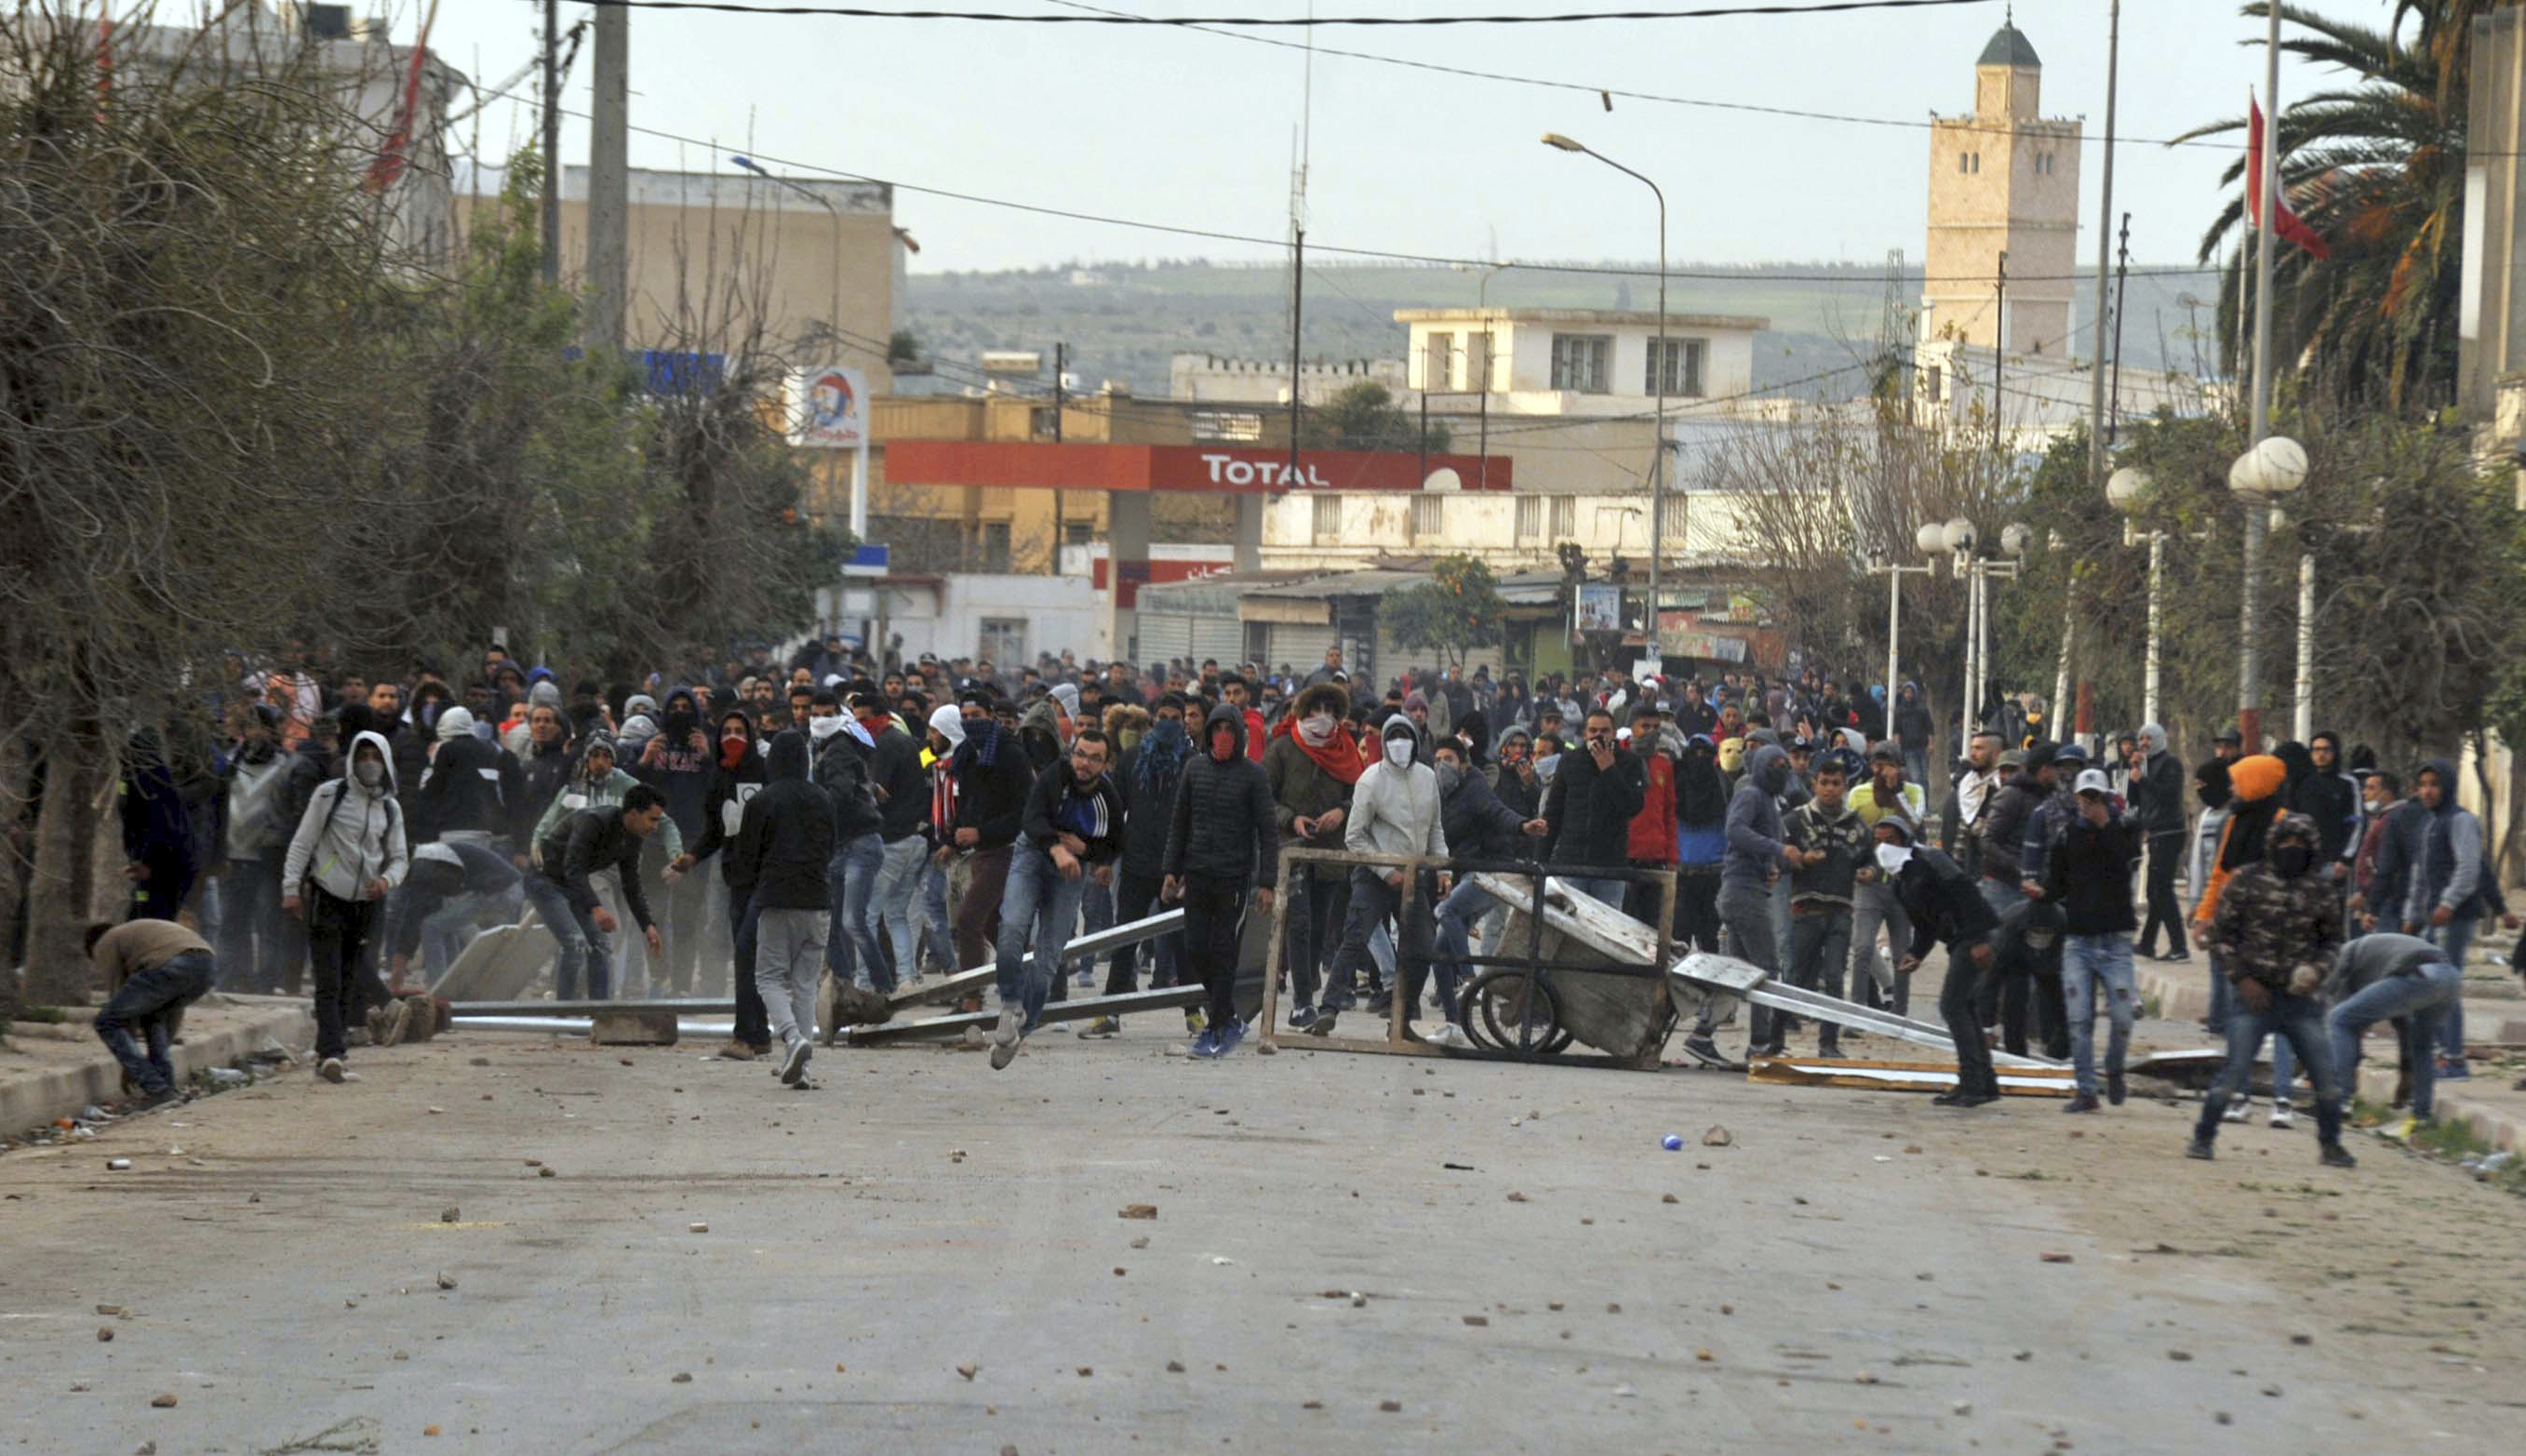 Protesters take the streets during anti-government protests, in Tebourba, south of the Tunisian capital, Tunis, Tuesday, Jan. 9, 2018. Tunisia's prime minister promised Tuesday to crack down on rioters after violent protests over price hikes left one person dead and raised fears of broader unrest in the country that was the birthplace of the Arab Spring.(AP Photo/Anis Ben Ali)